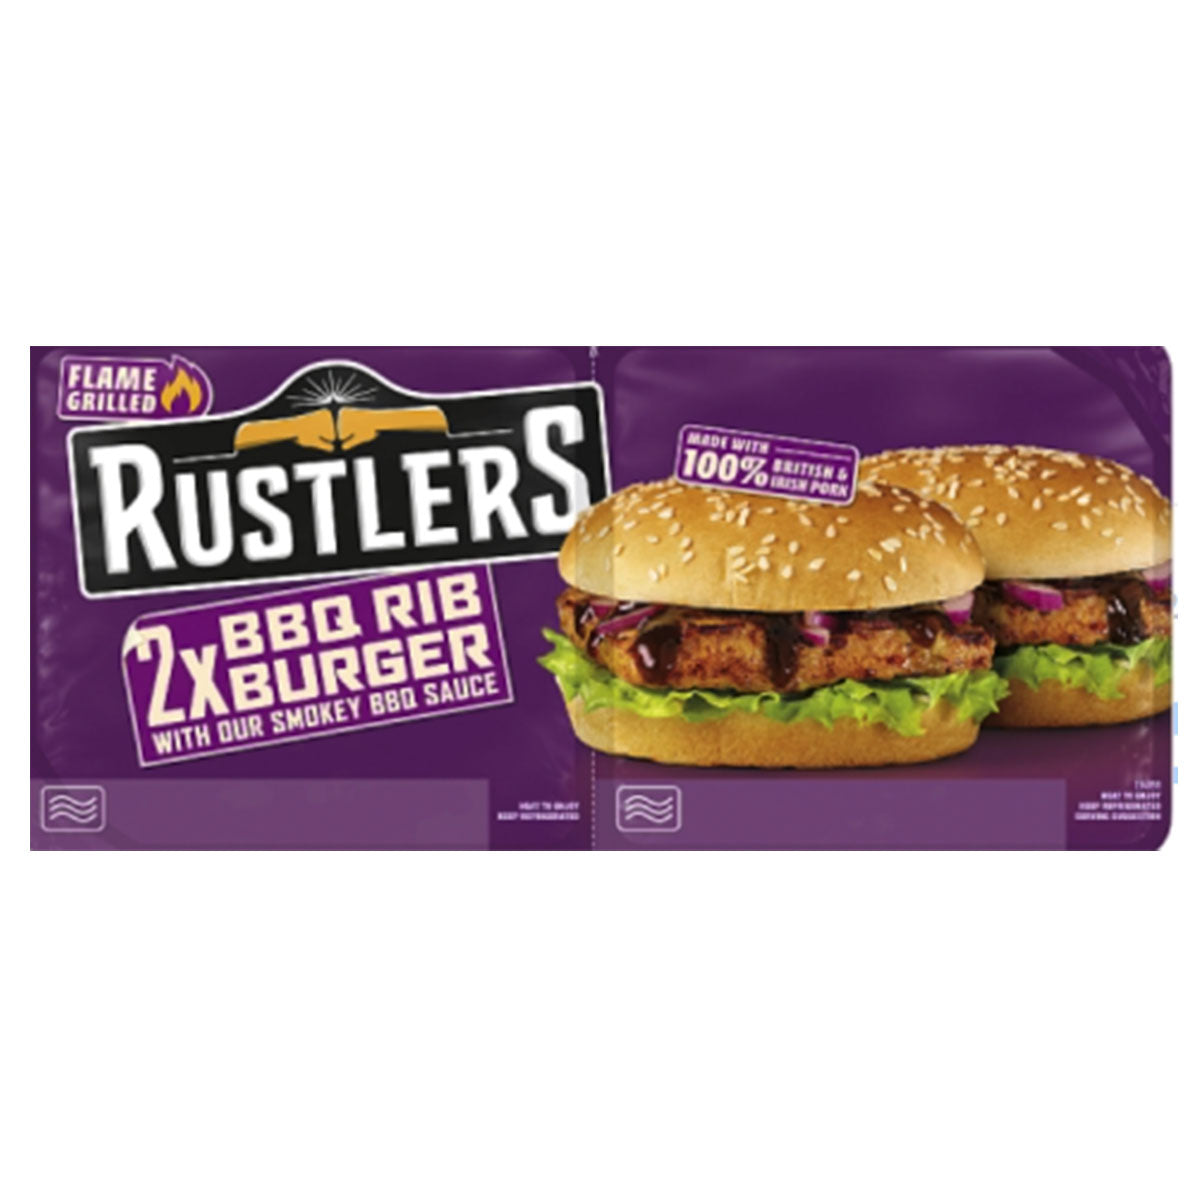 Rustlers - 2 BBQ Rib Burger with Our Smokey BBQ Sauce - 244g - Continental Food Store